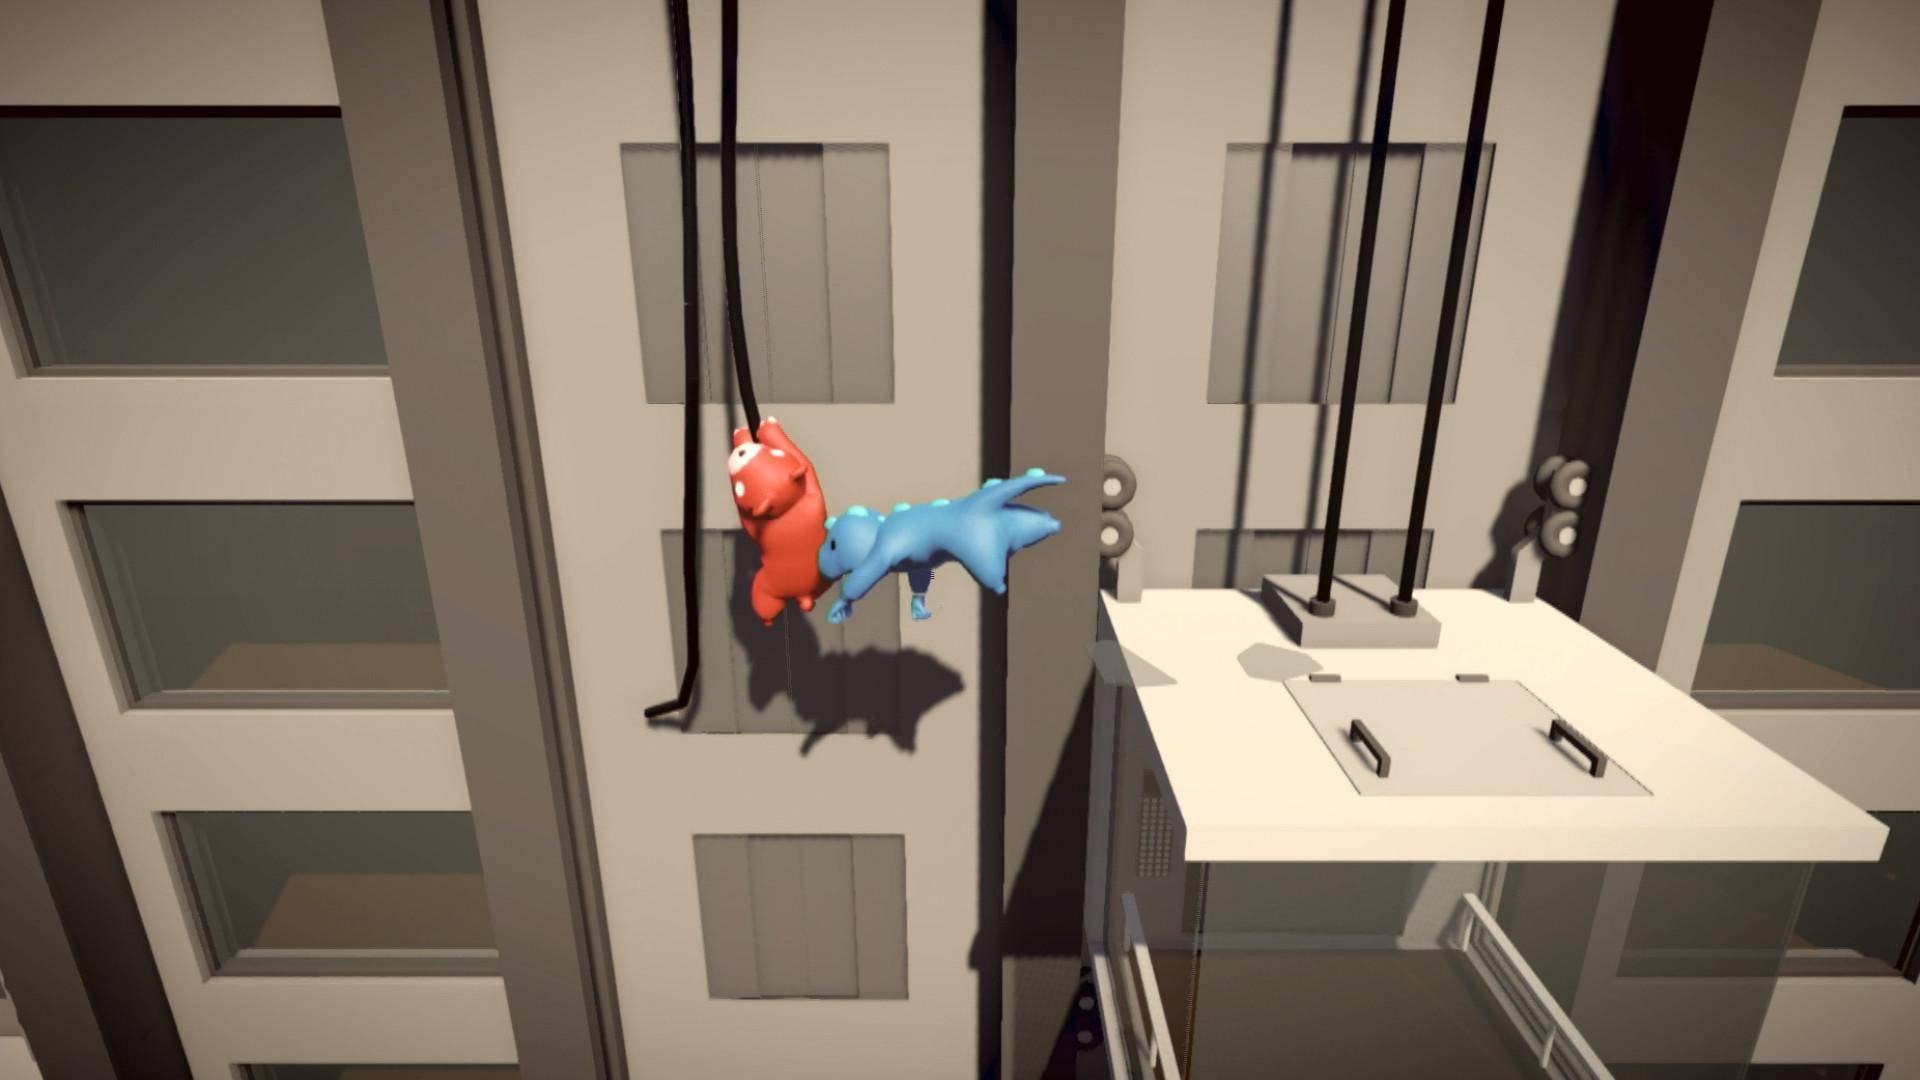 gang beasts switch